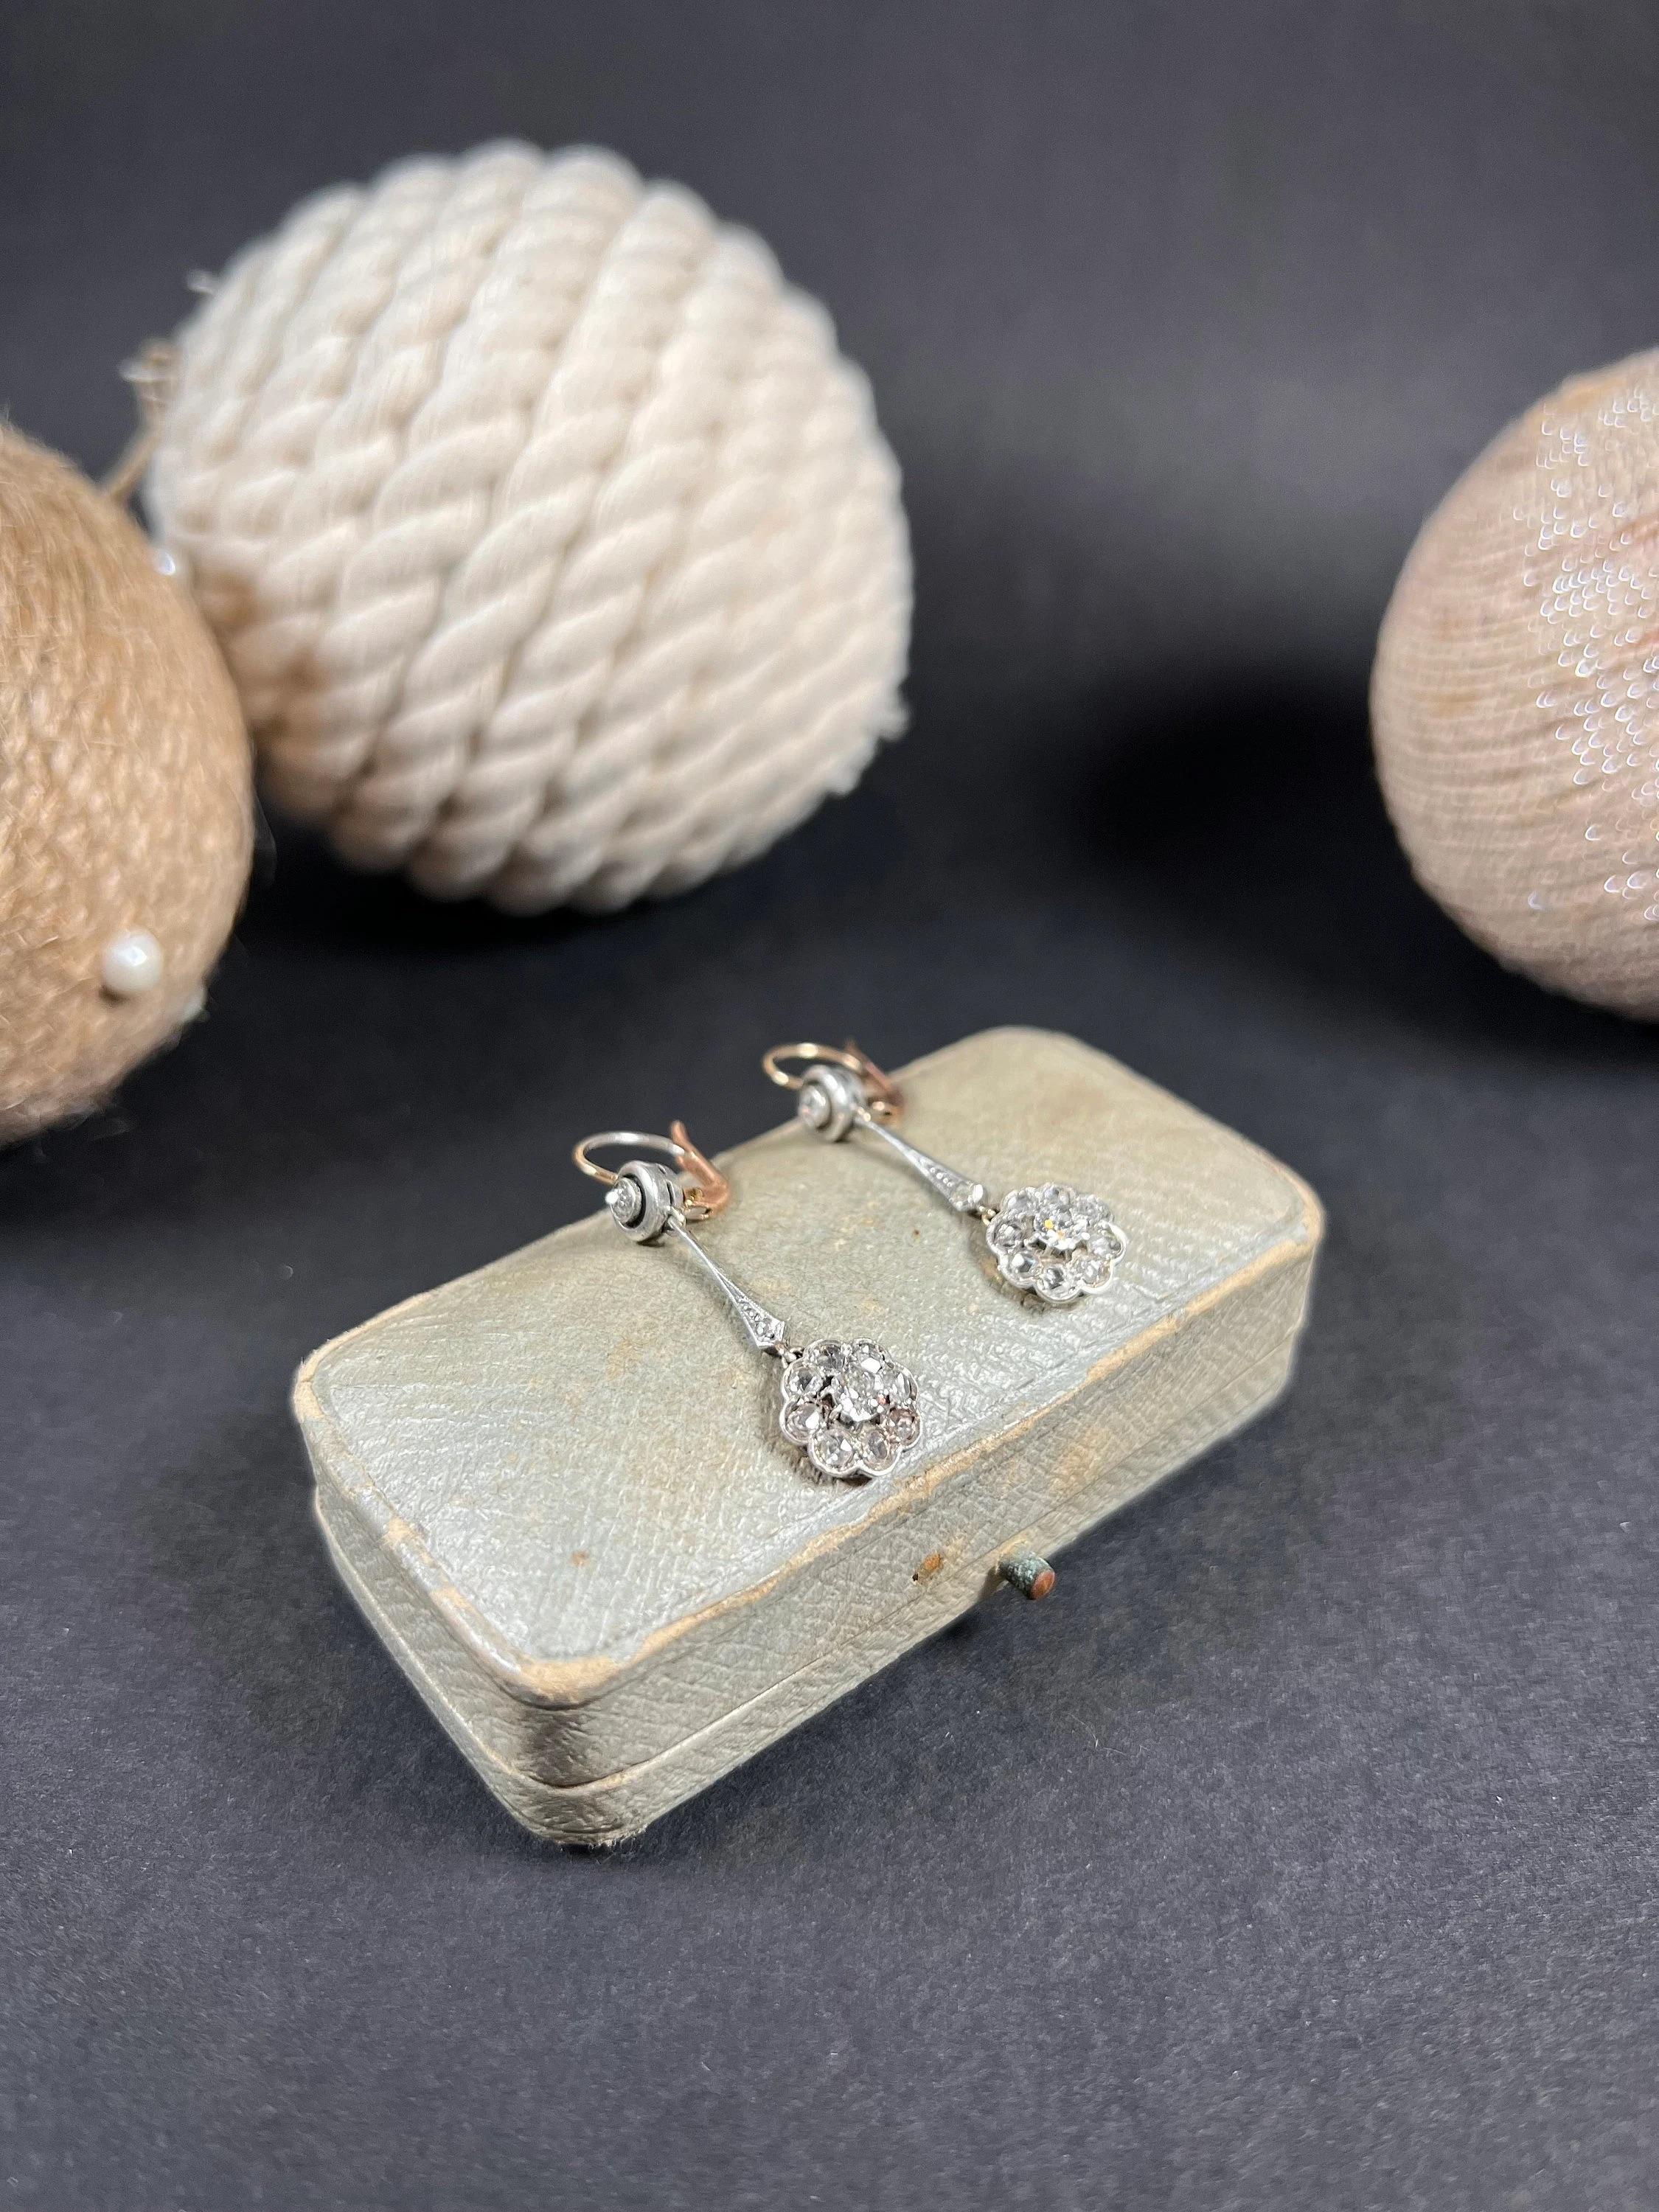 Antique Diamond Earrings 

18ct Yellow Gold & Platinum Tested

Circa 1900

These stunning drop-style earrings exude a classic charm with their elegant long stems and diamond-set daisy formations at the bottom. The earrings boast a sophisticated